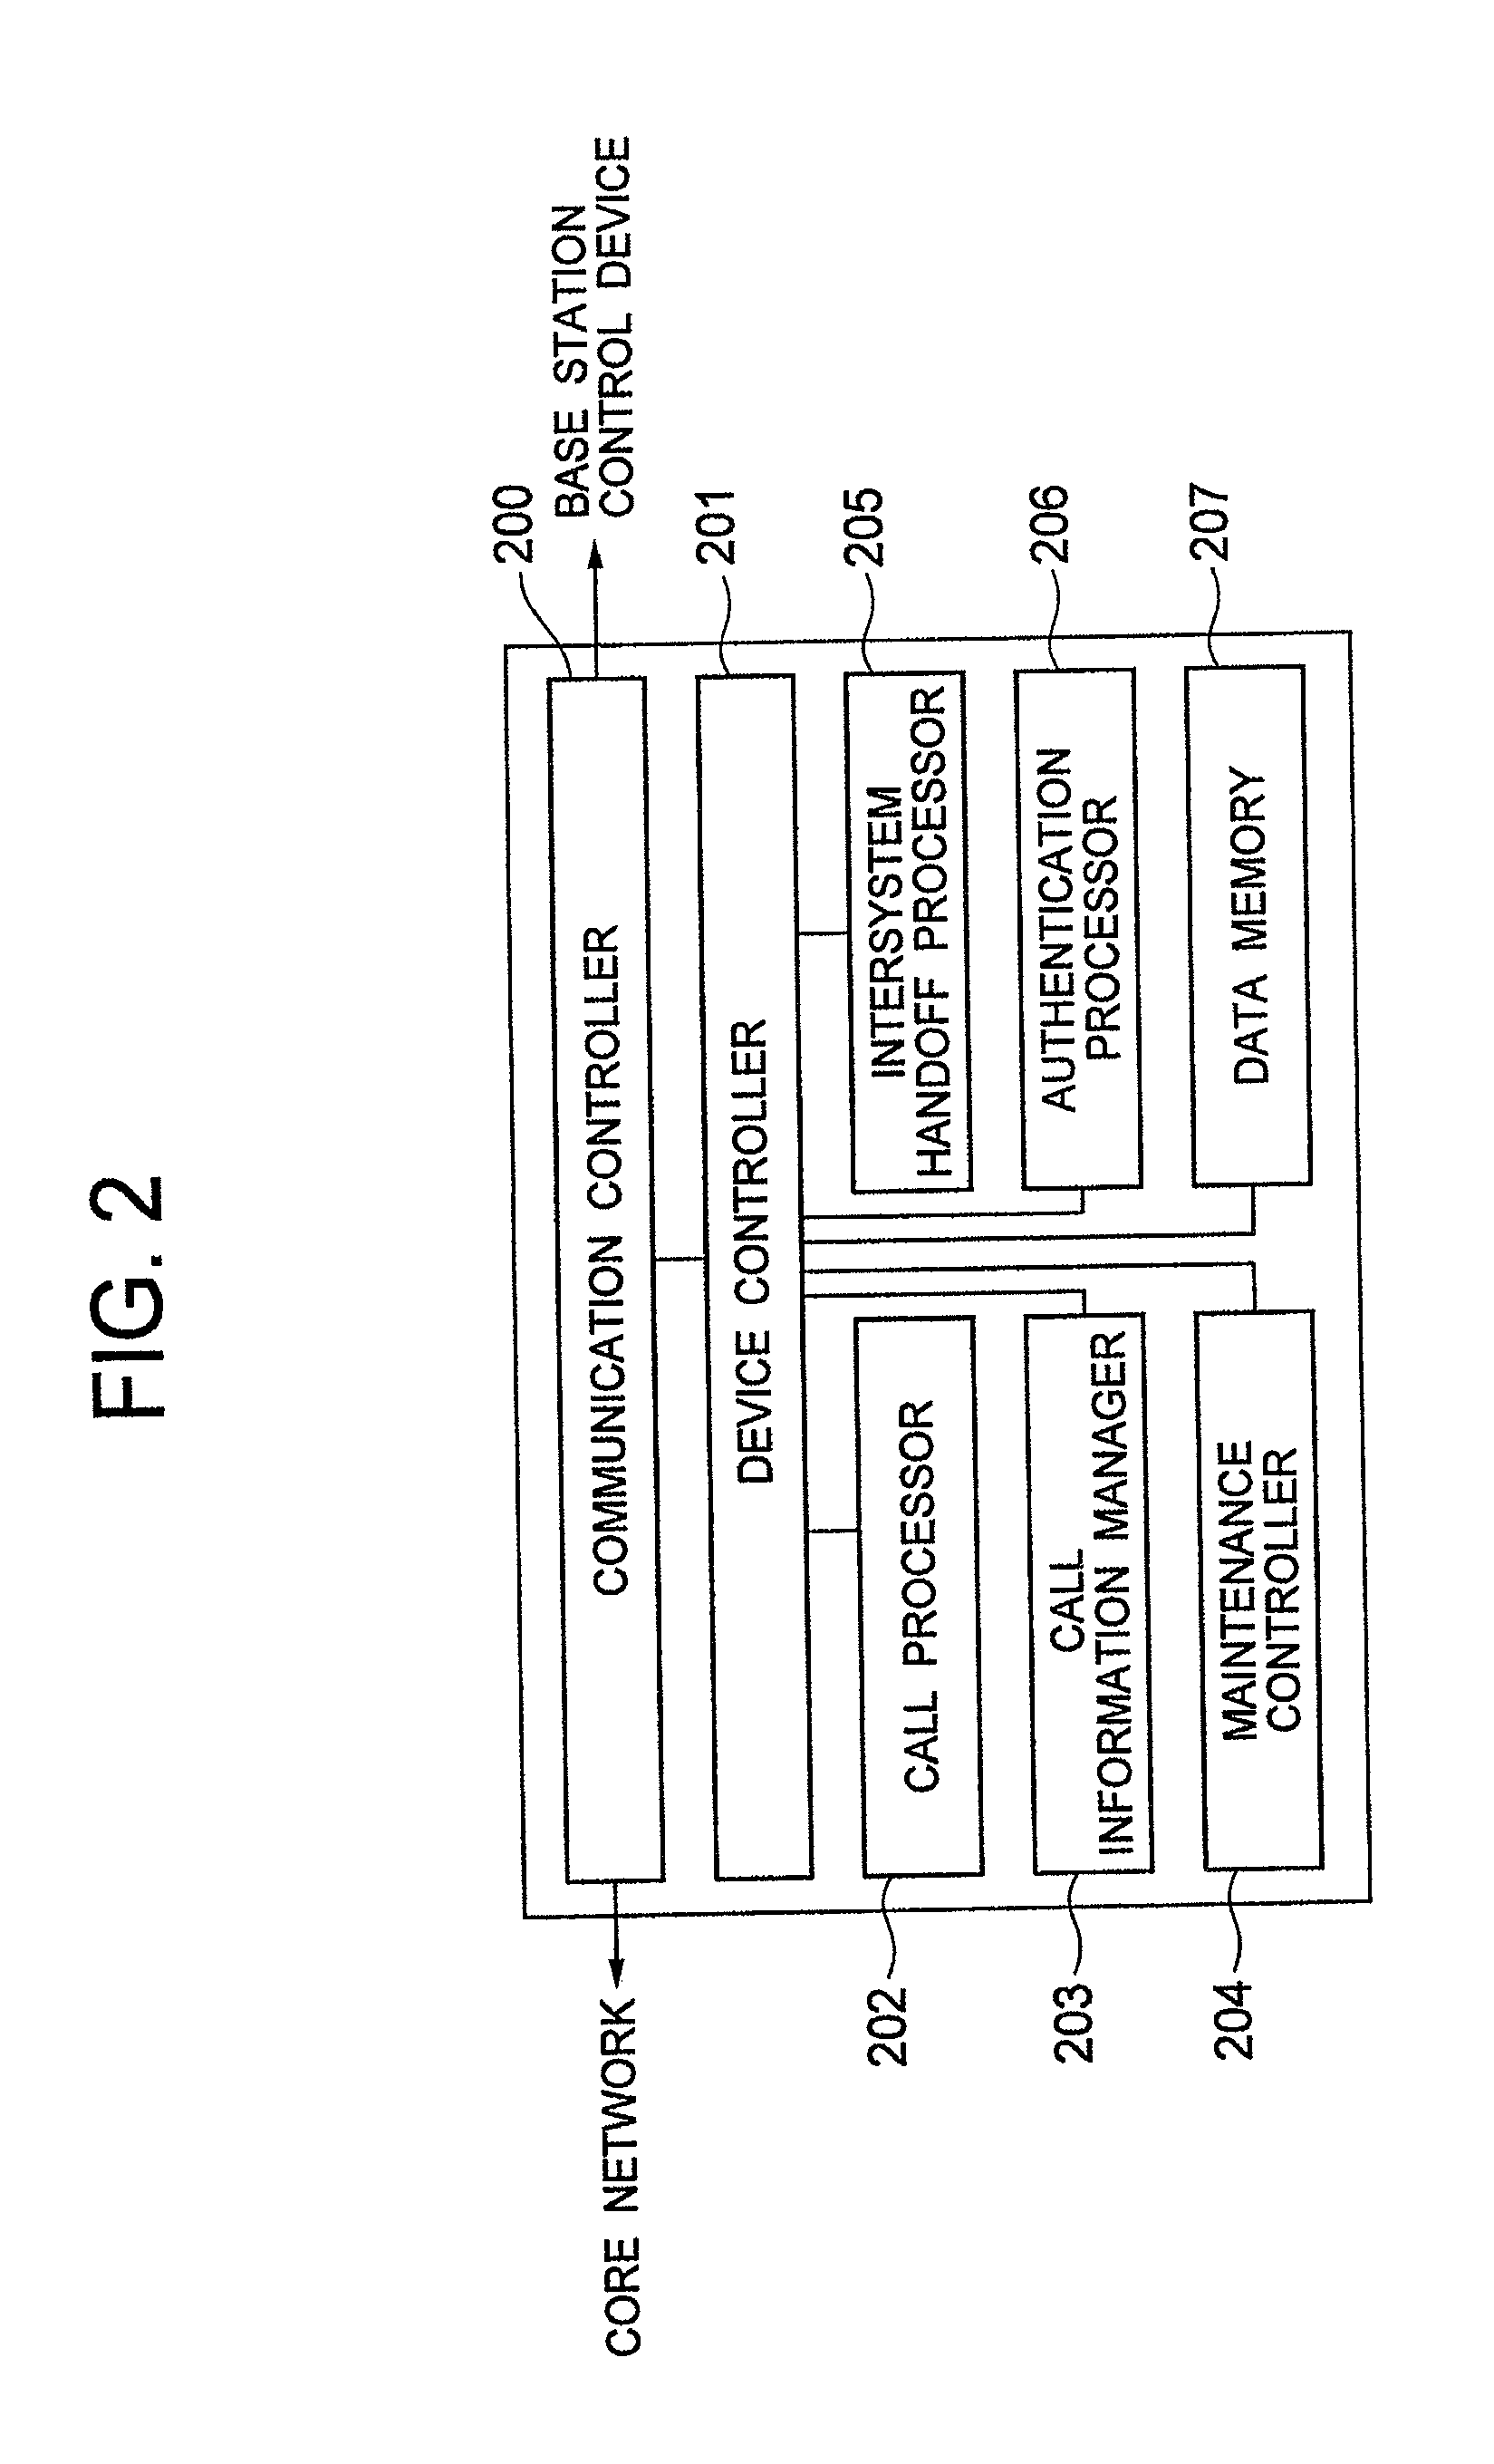 Handoff method between different systems and wireless terminal